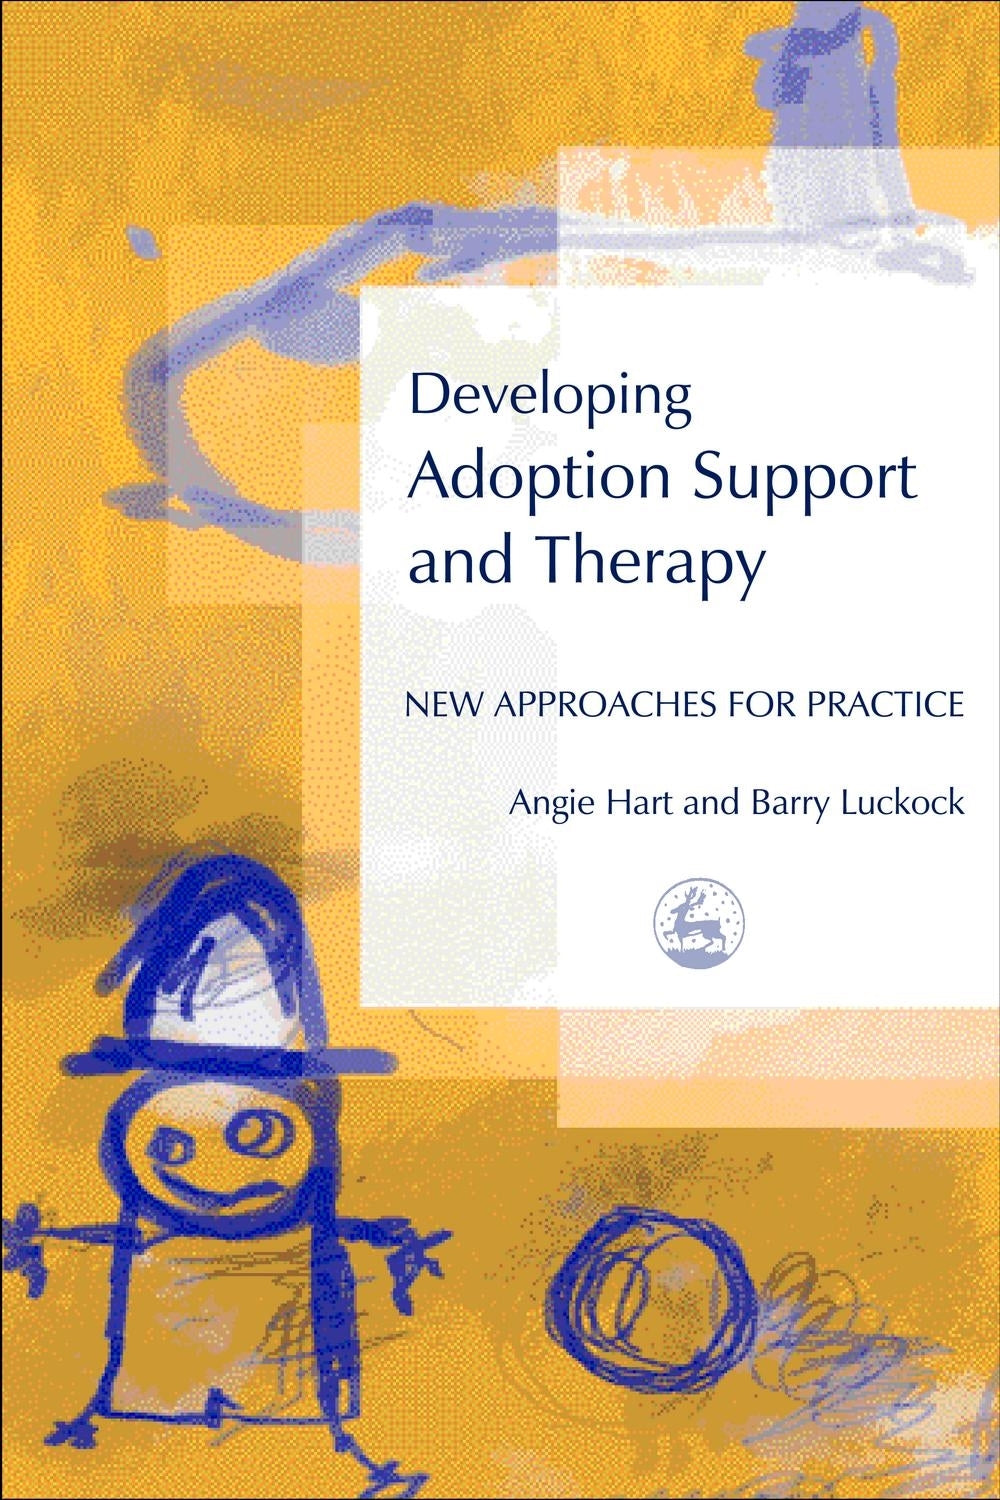 Developing Adoption Support and Therapy by Angie Hart, Barry Luckock